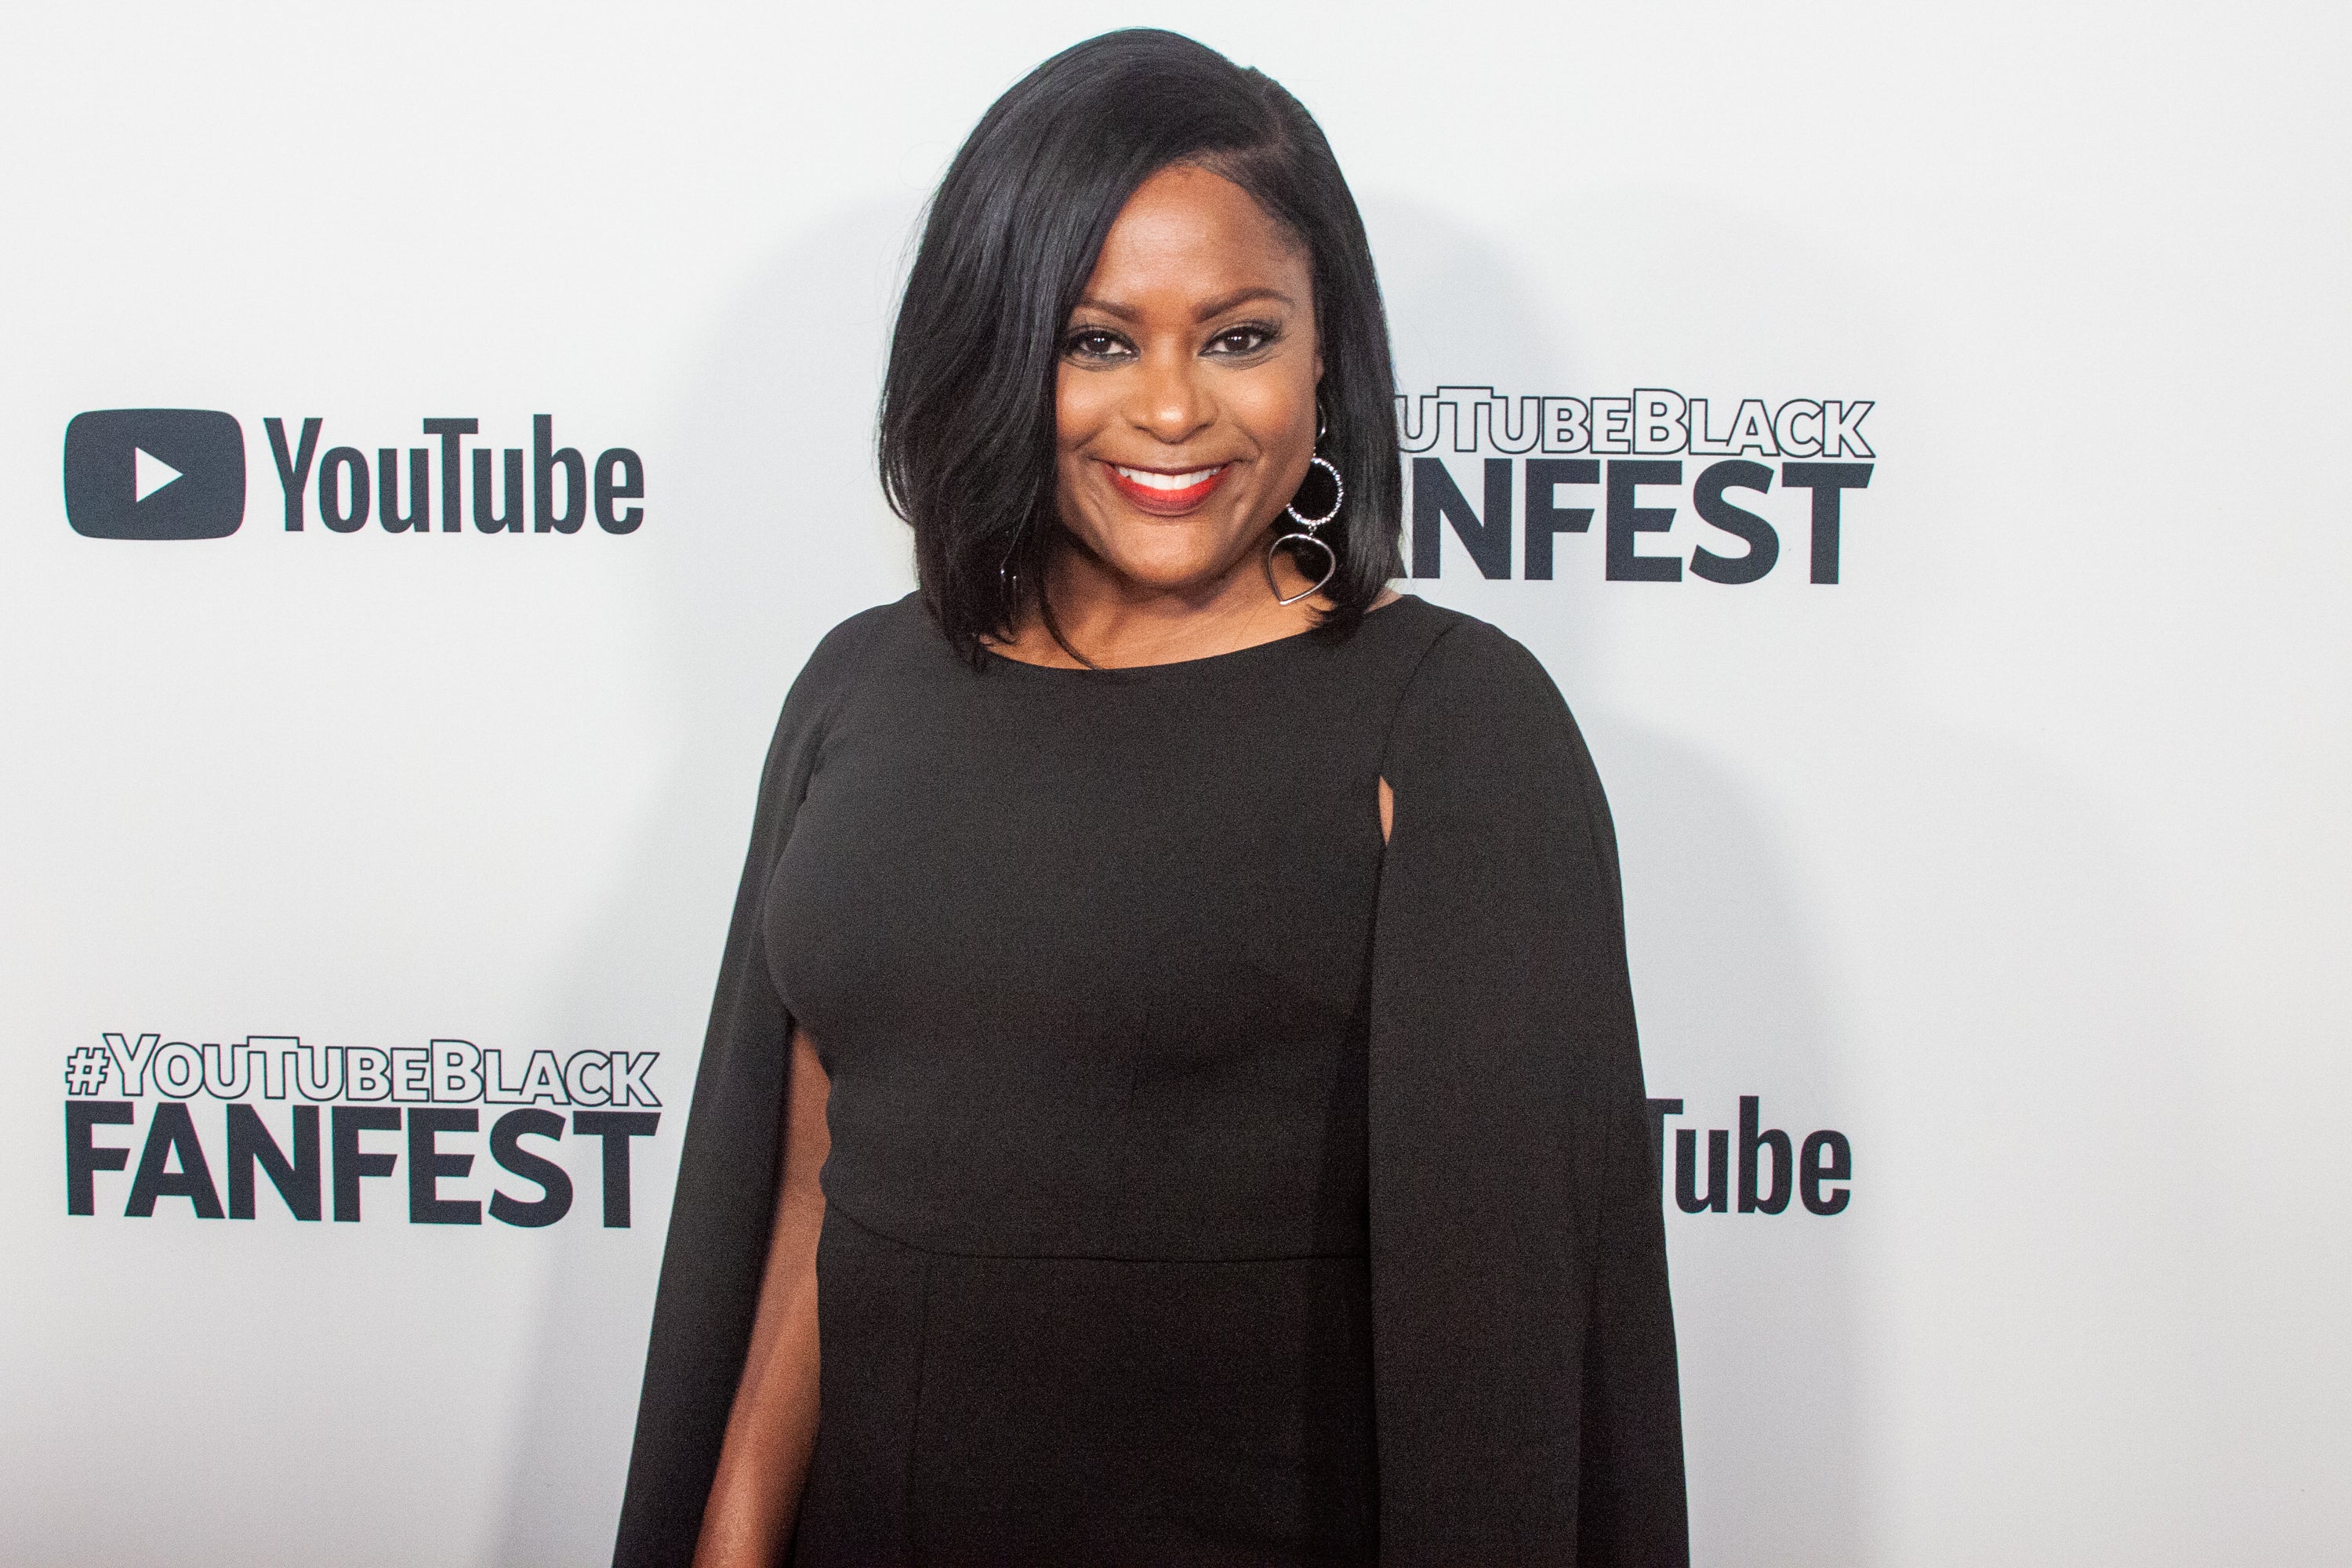 Celebrities And Influencers Were Fresh-Faced At #YouTubeBlack FanFest ...